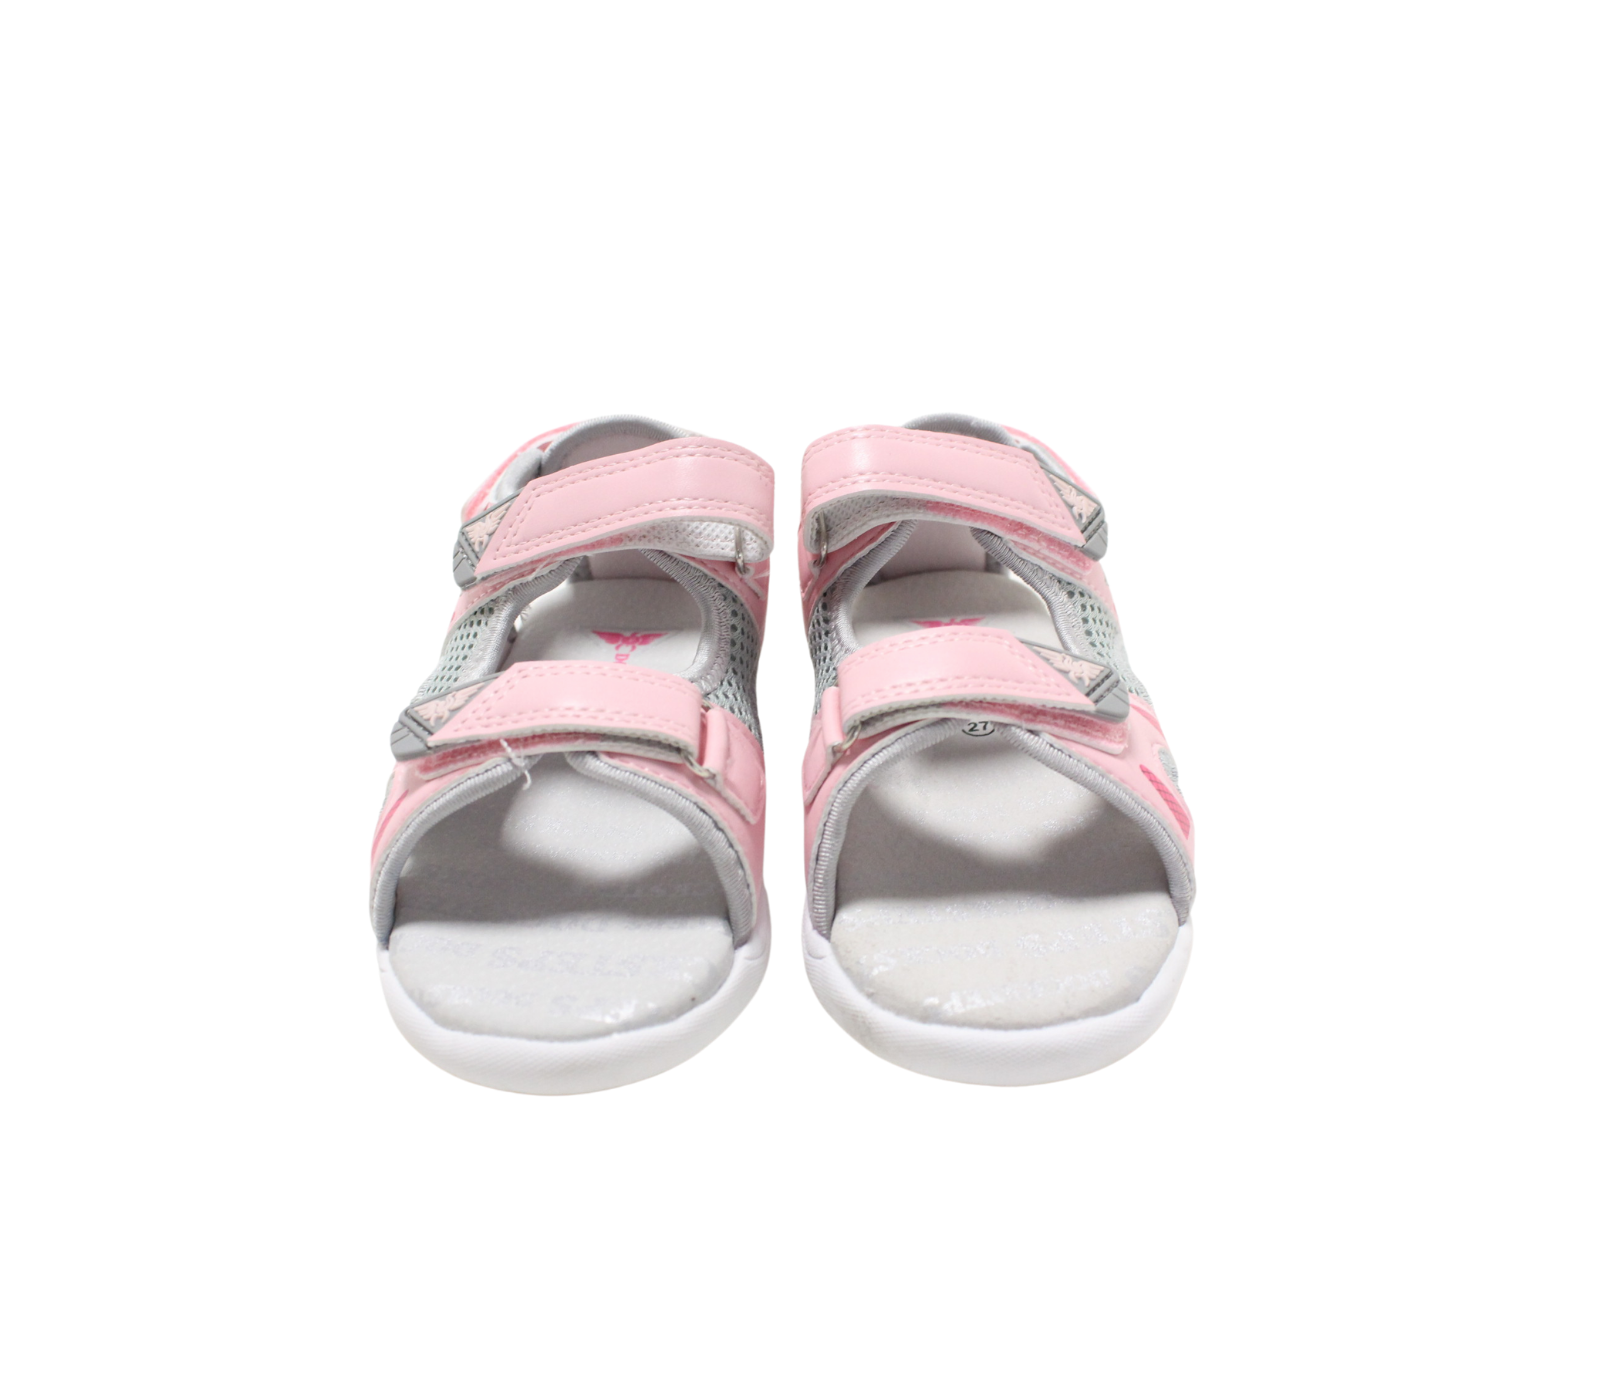 Pink Baby Girl Sandals in Simil leather and Padded Fabric.